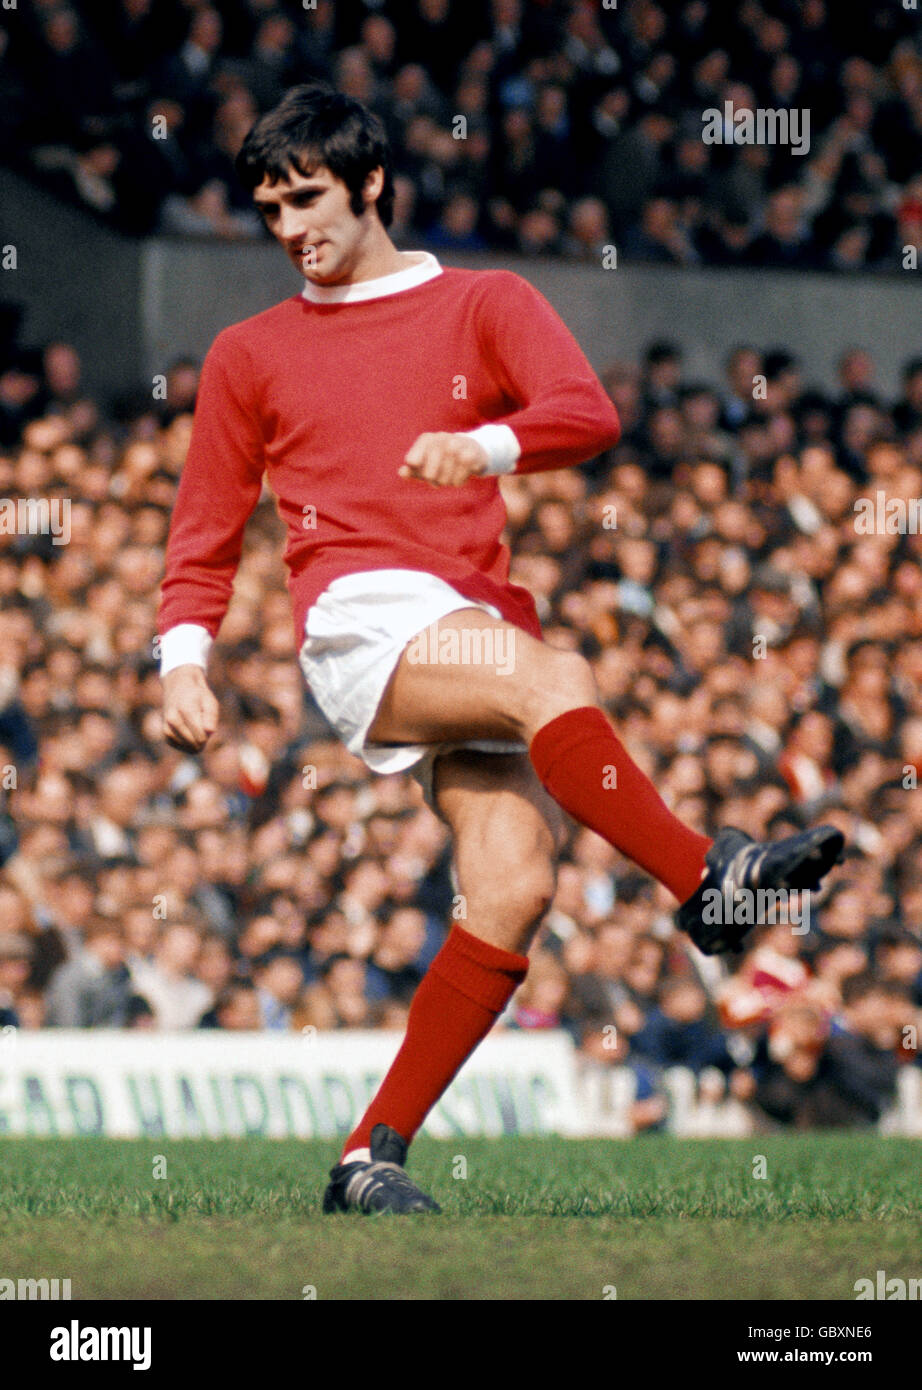 Fußball - Football League Division One - Manchester United / Fulham. George Best, Manchester United Stockfoto